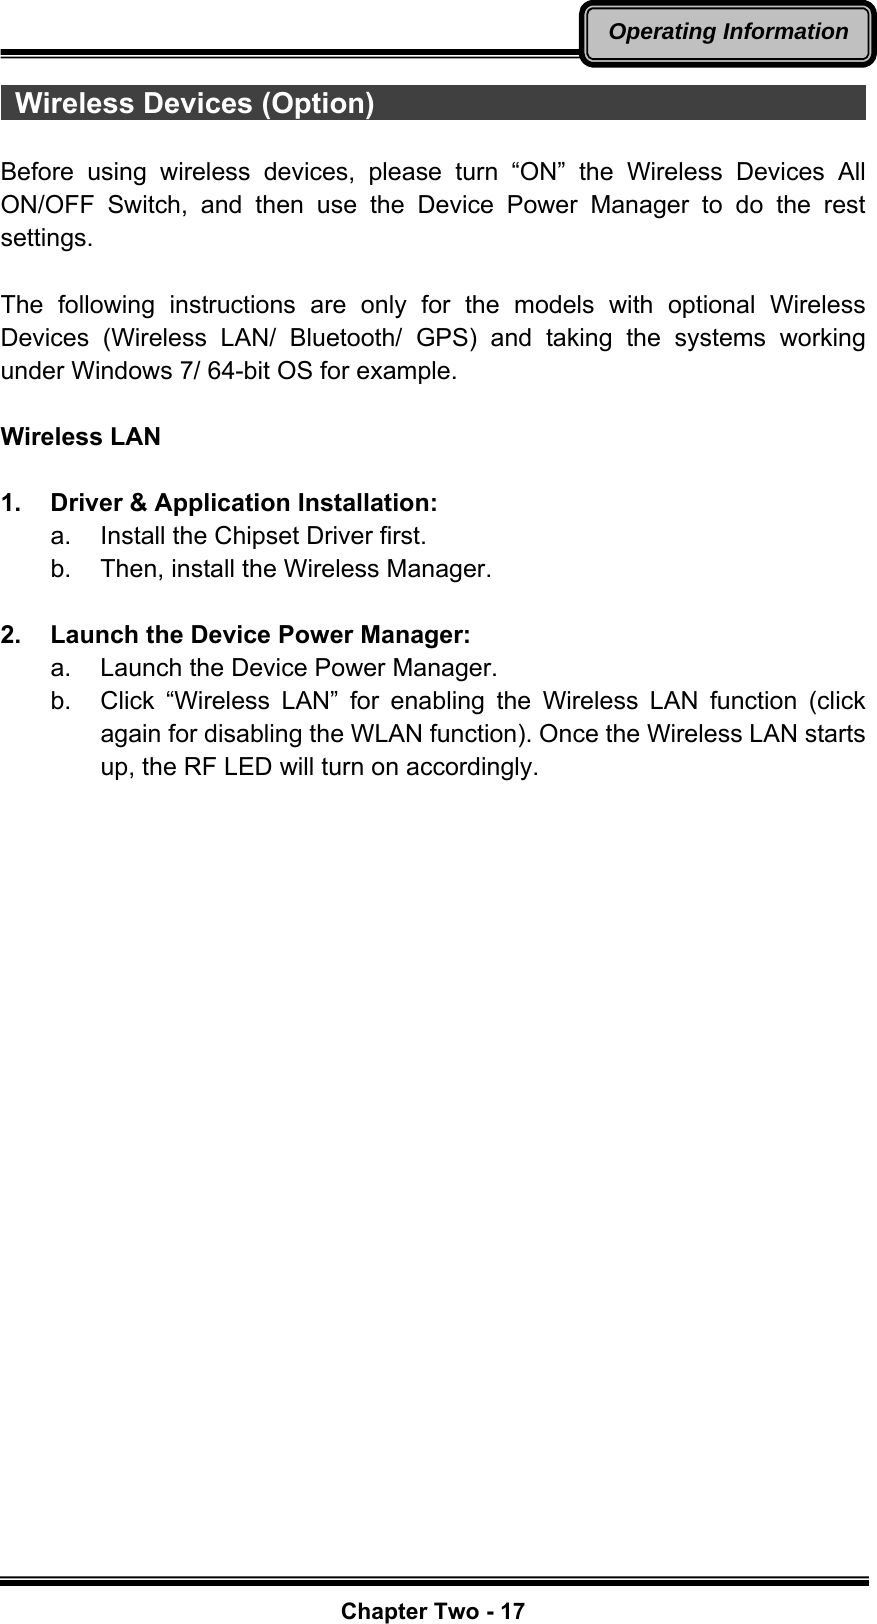   Chapter Two - 17Operating Information Wireless Devices (Option)                                        Before using wireless devices, please turn “ON” the Wireless Devices All ON/OFF Switch, and then use the Device Power Manager to do the rest settings.  The following instructions are only for the models with optional Wireless Devices (Wireless LAN/ Bluetooth/ GPS) and taking the systems working under Windows 7/ 64-bit OS for example.  Wireless LAN  1.  Driver &amp; Application Installation: a.  Install the Chipset Driver first. b.  Then, install the Wireless Manager.  2.  Launch the Device Power Manager: a.  Launch the Device Power Manager.   b.  Click “Wireless LAN” for enabling the Wireless LAN function (click again for disabling the WLAN function). Once the Wireless LAN starts up, the RF LED will turn on accordingly.    